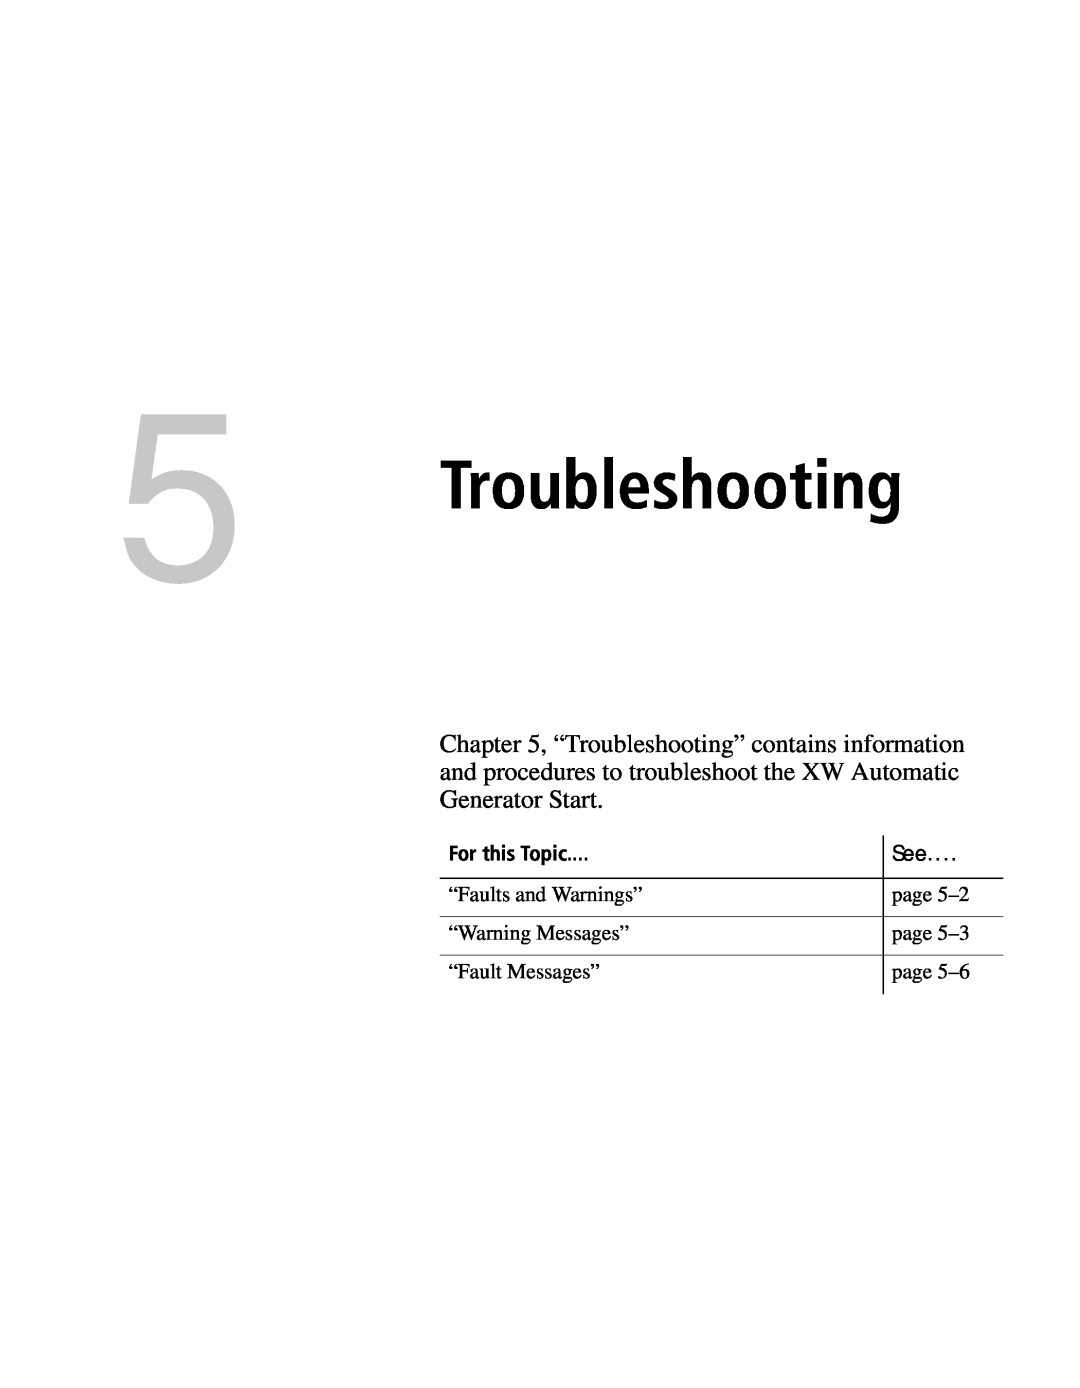 Xantrex Technology XW manual Troubleshooting, “Faults and Warnings” “Warning Messages” “Fault Messages”, page page page 